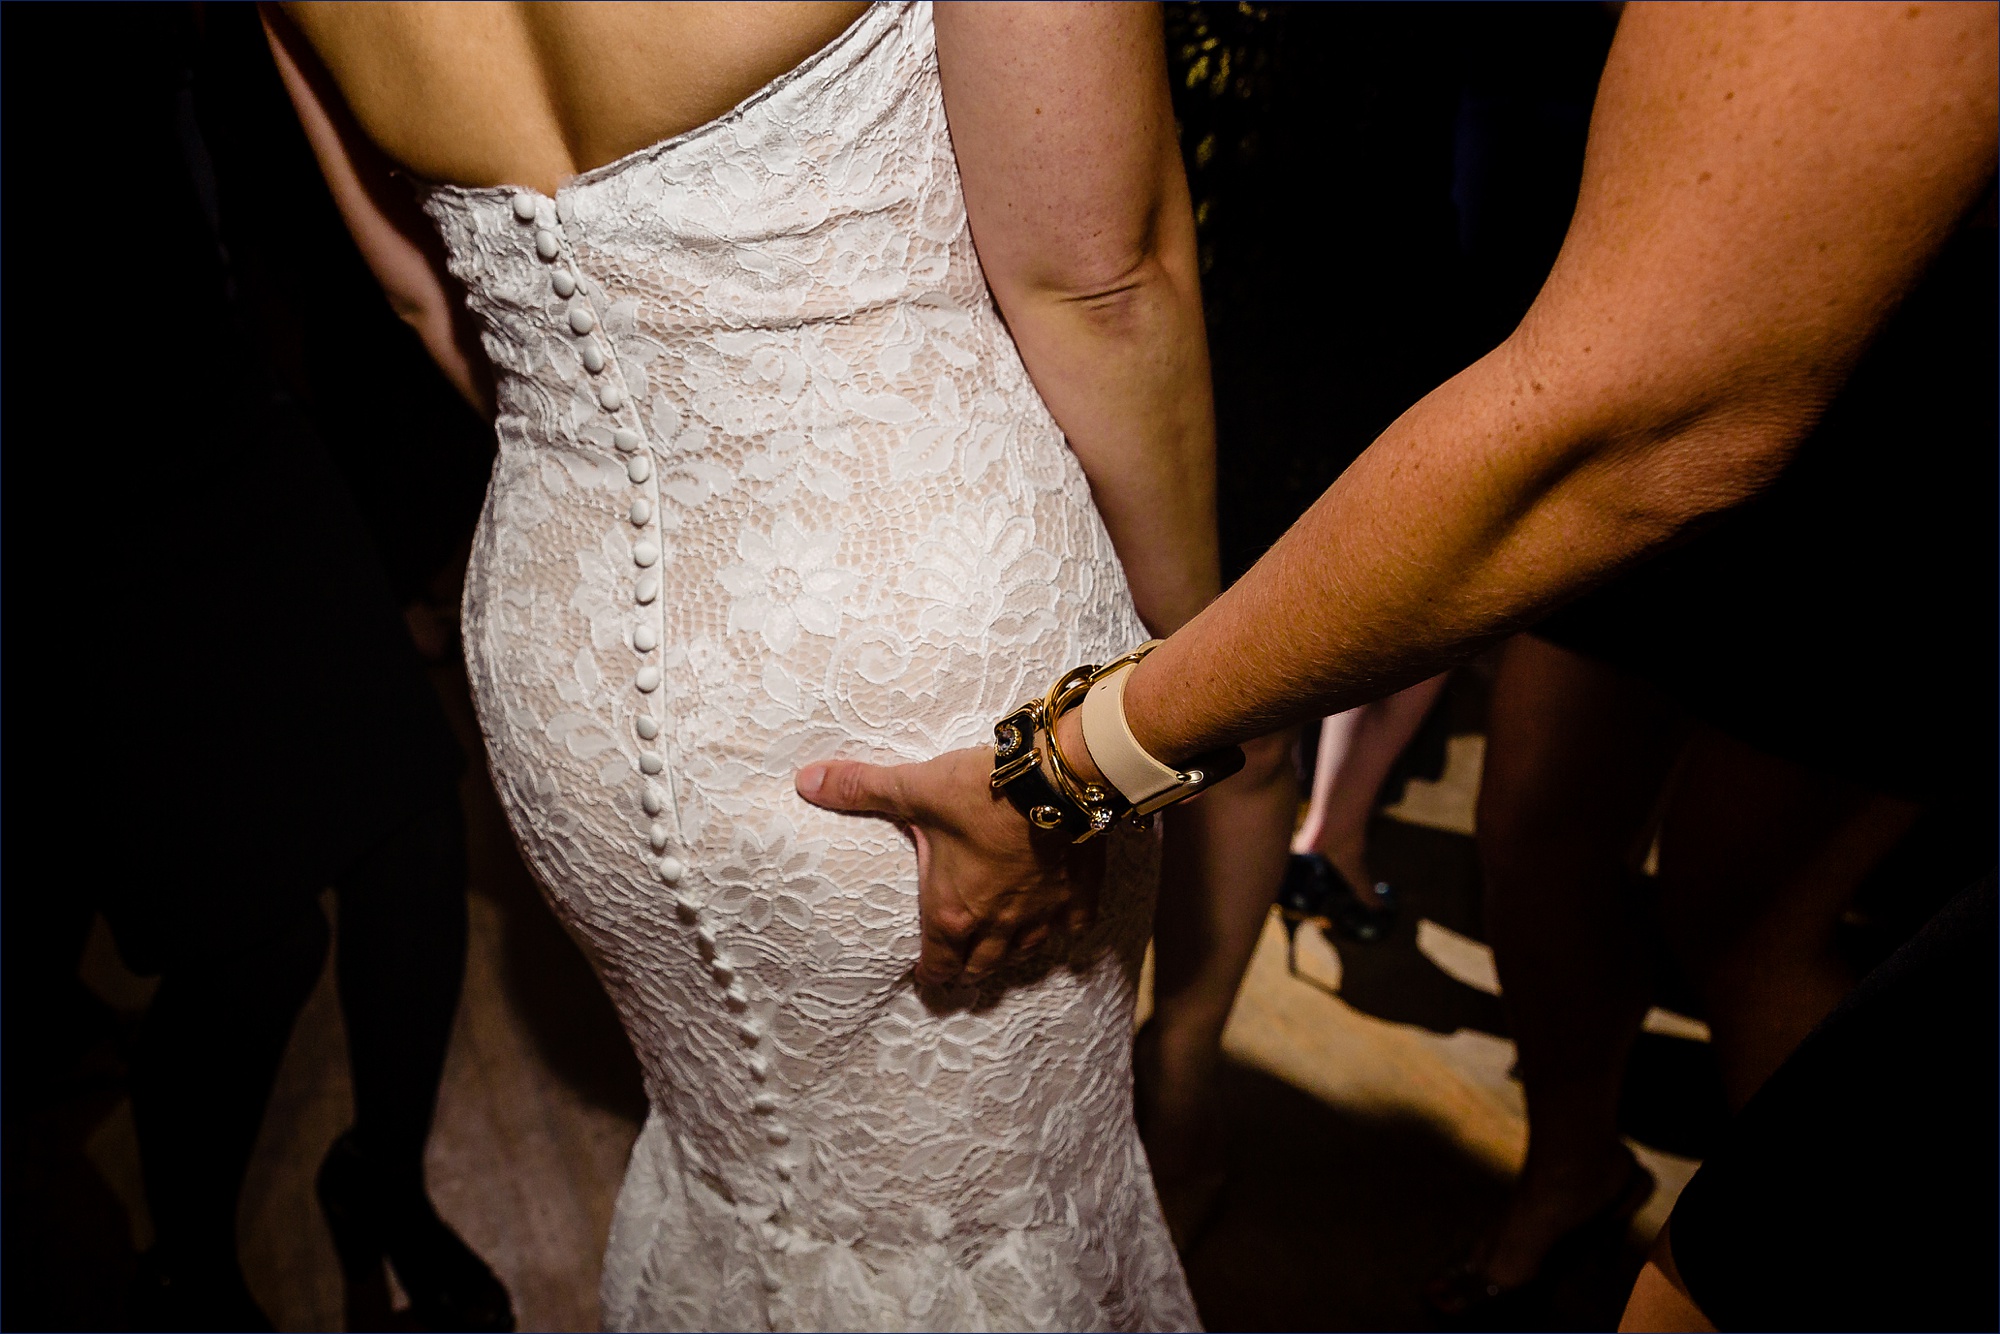 Butt squeeze for the bride at her wedding reception